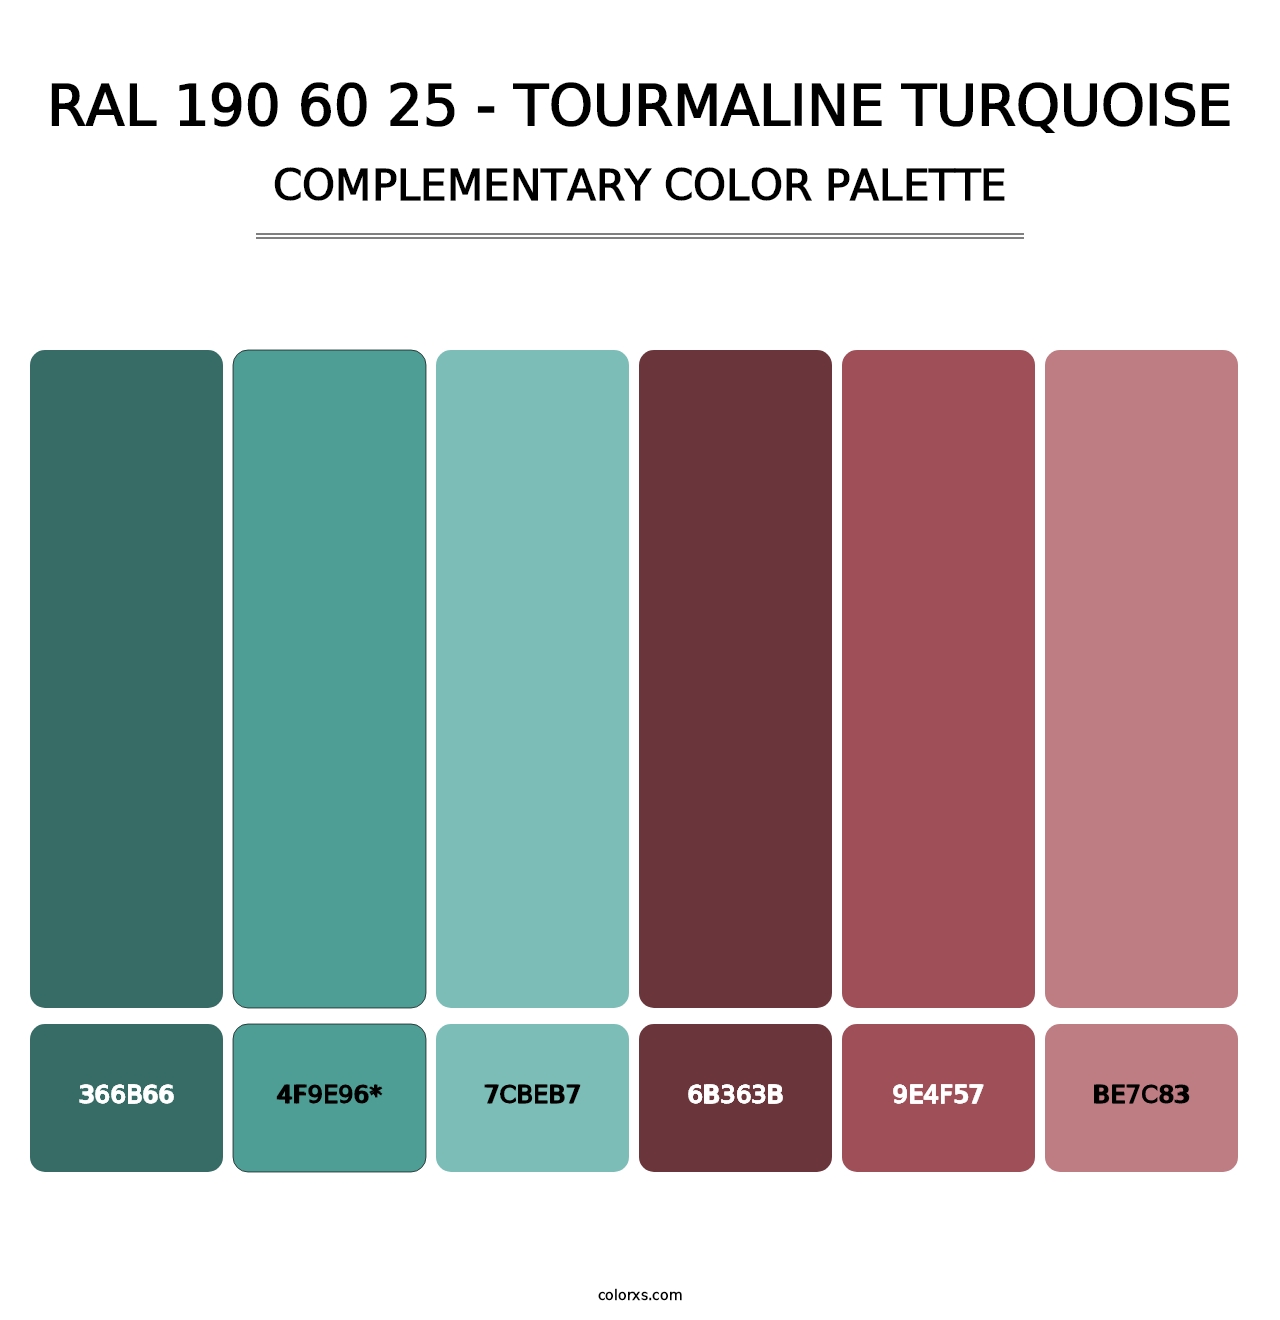 RAL 190 60 25 - Tourmaline Turquoise - Complementary Color Palette